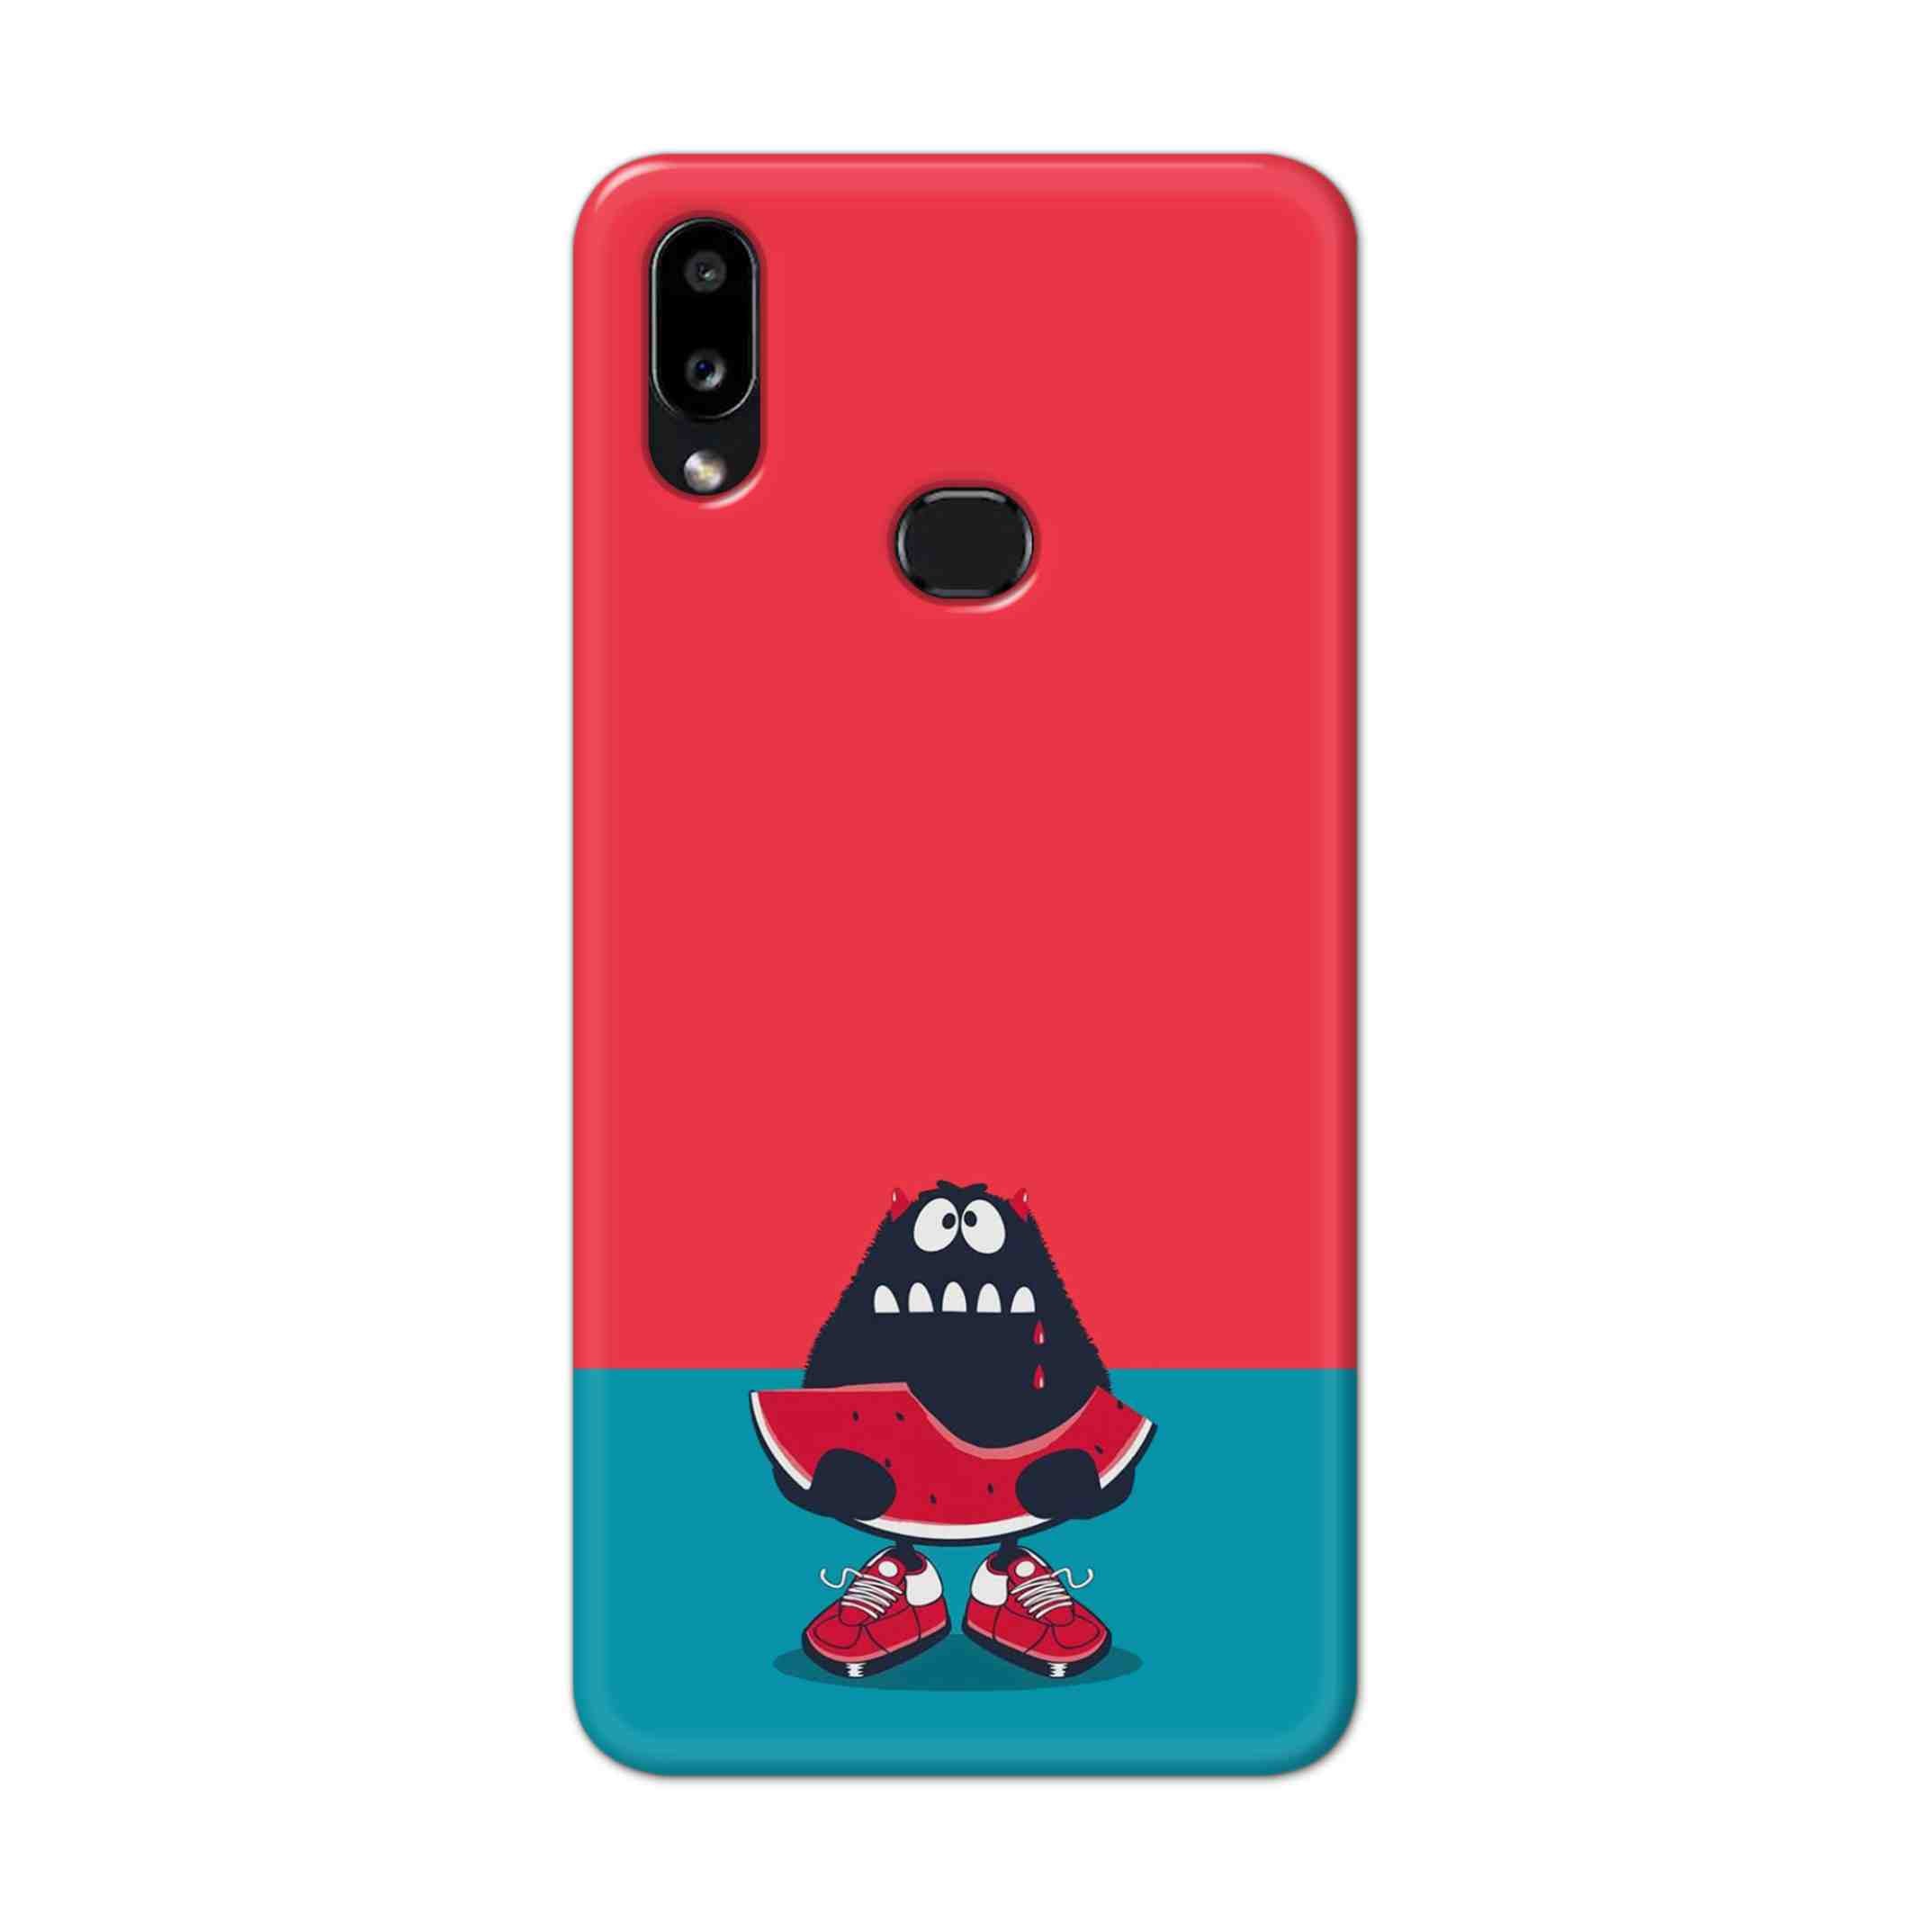 Buy Watermelon Hard Back Mobile Phone Case Cover For Samsung Galaxy M01s Online